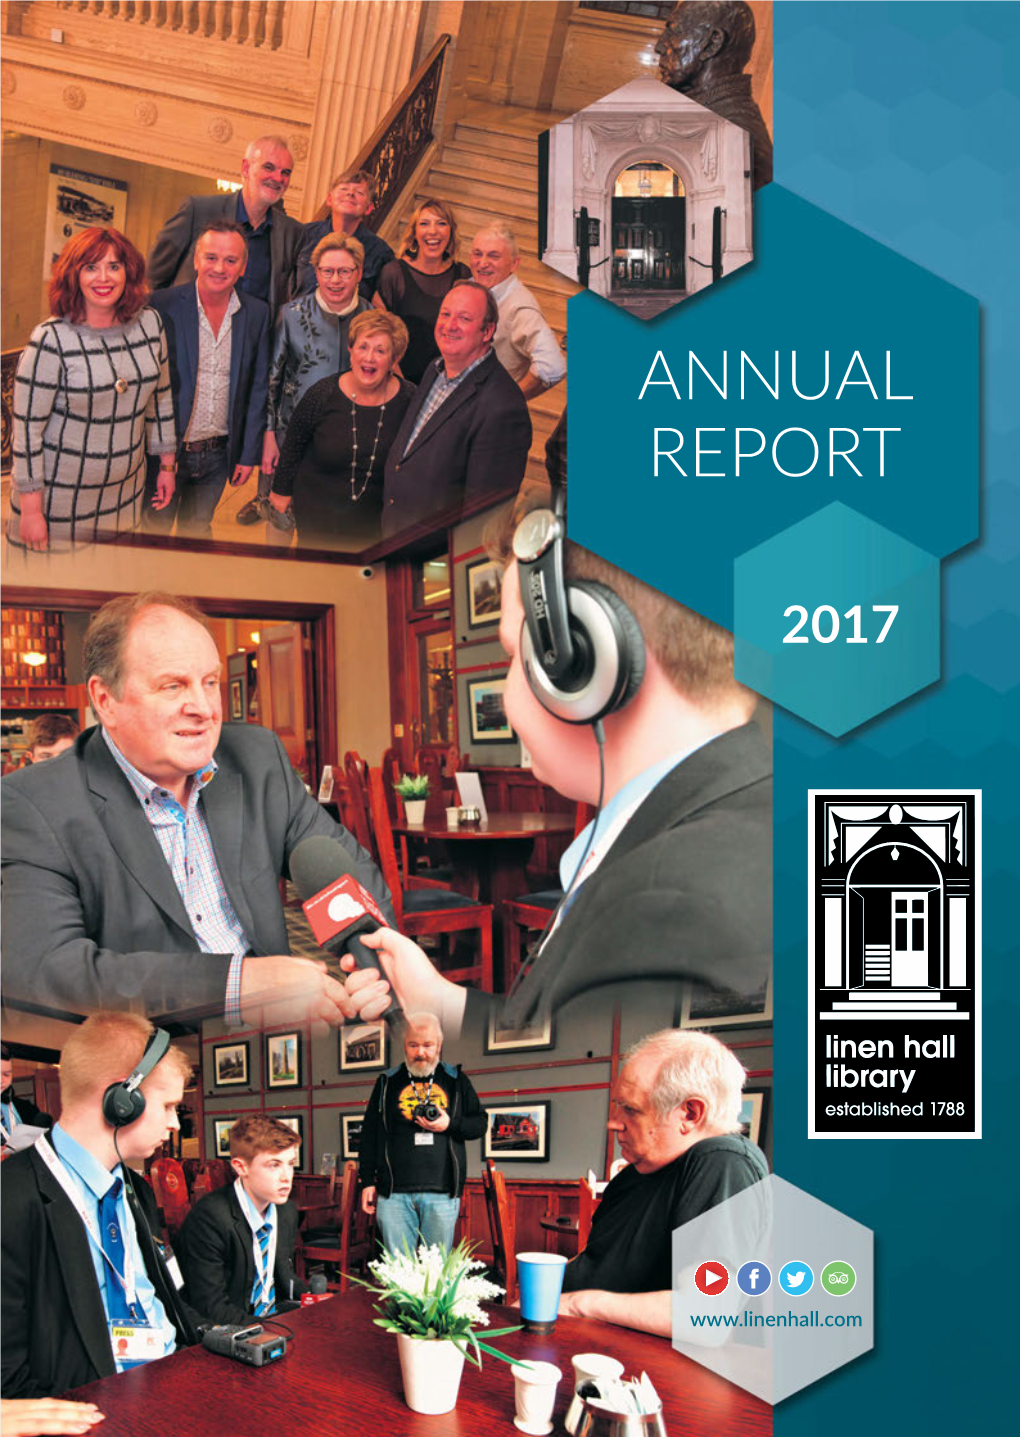 Annual Report 2017 Final Hi-Res 19/04/2018 12:49 Page 1